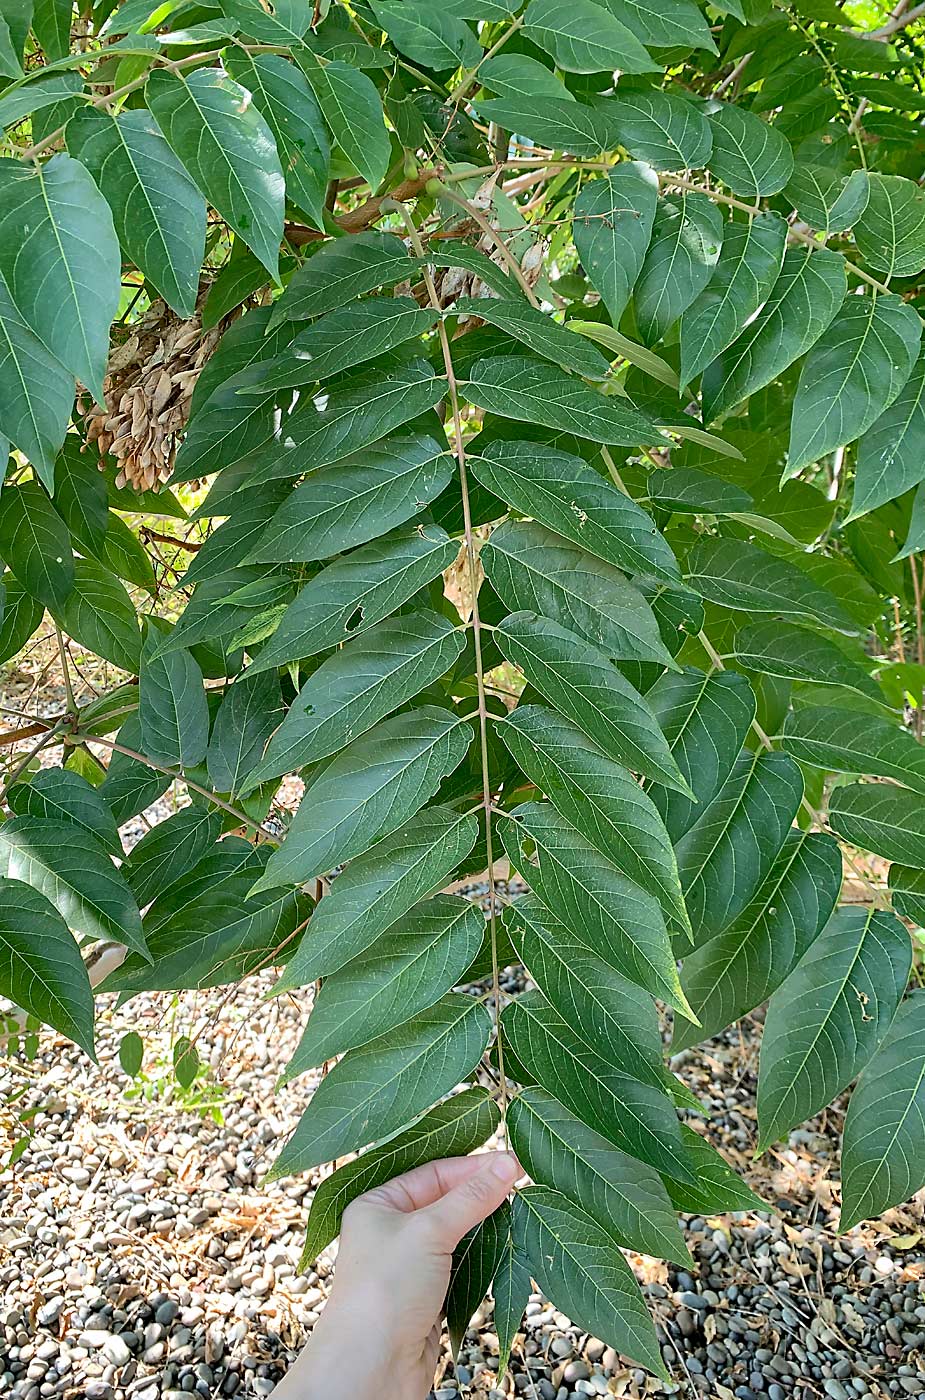 Tree of heaven, which has mostly smooth leaflets as shown, is often confused with black walnut and sumac, which have toothed, or serrated, leaflets. (Courtesy Washington State Noxious Weed Control Board)